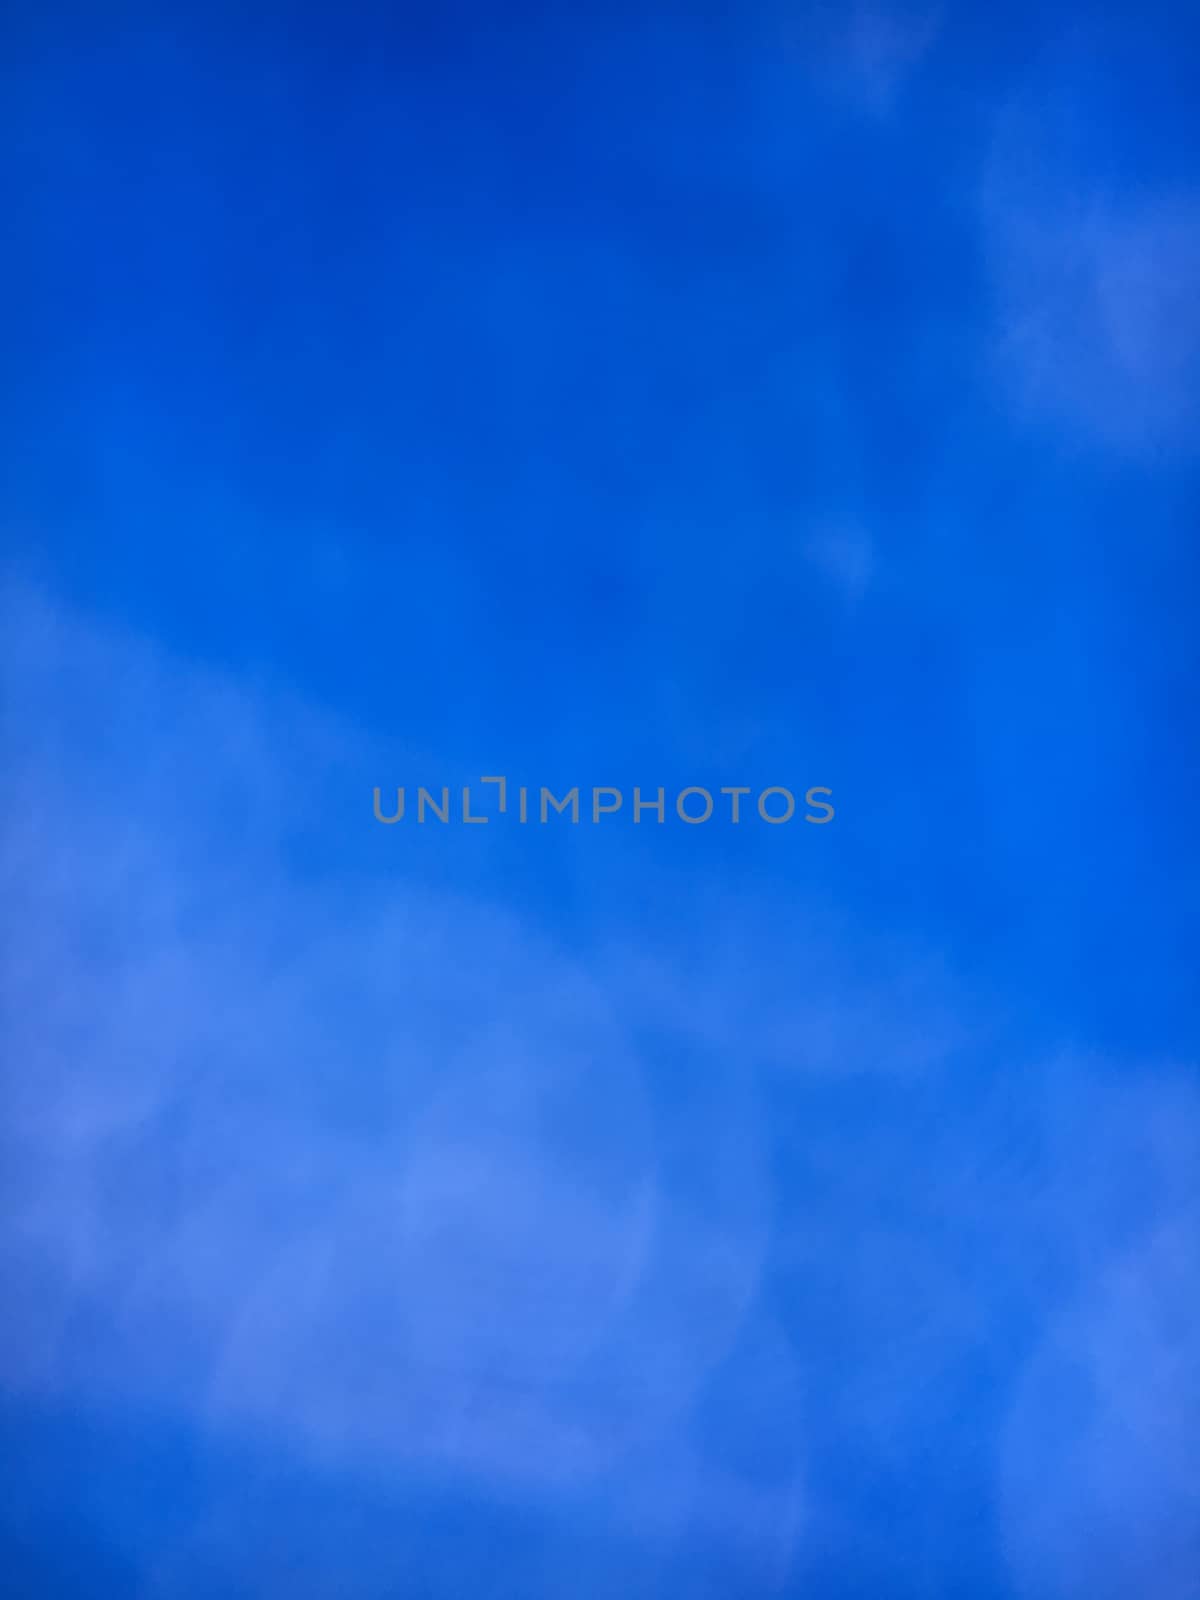 Blue wispy background abstract